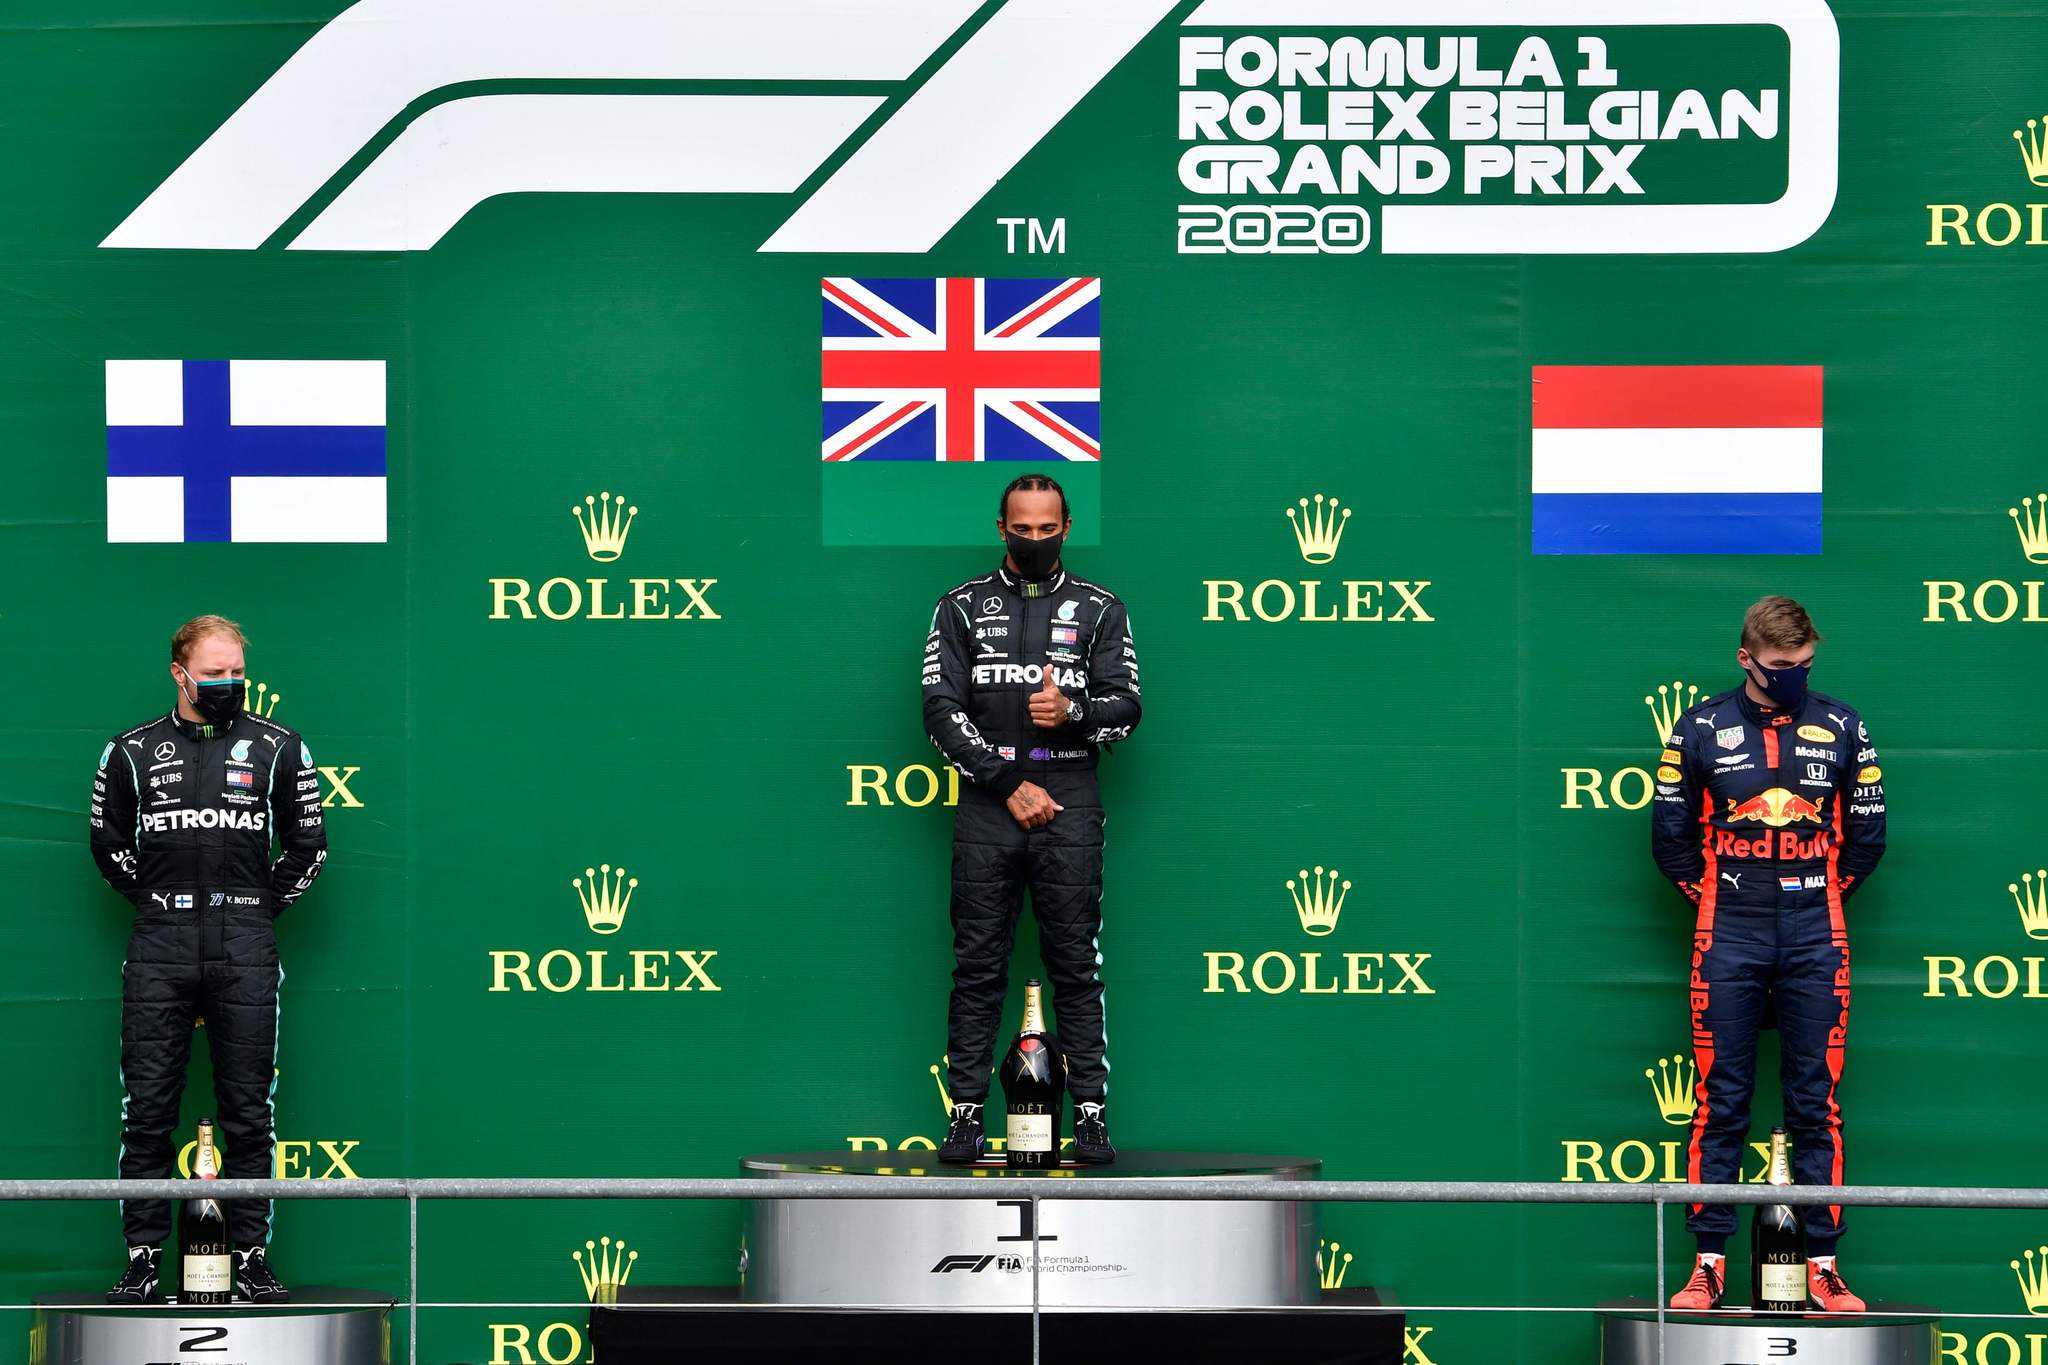 Winner Mercedes British driver Lewis Hamilton (C) celebrates on the podium next to second placed Mercedes Finnish driver Valtteri Bottas (L) and third placed Red Bulls Dutch driver Max lt;HIT gt;Verstappen lt;/HIT gt; after the Belgian Formula One Grand Prix at the Spa-Francorchamps circuit in Spa on August 30, 2020. (Photo by JOHN THYS / POOL / AFP)